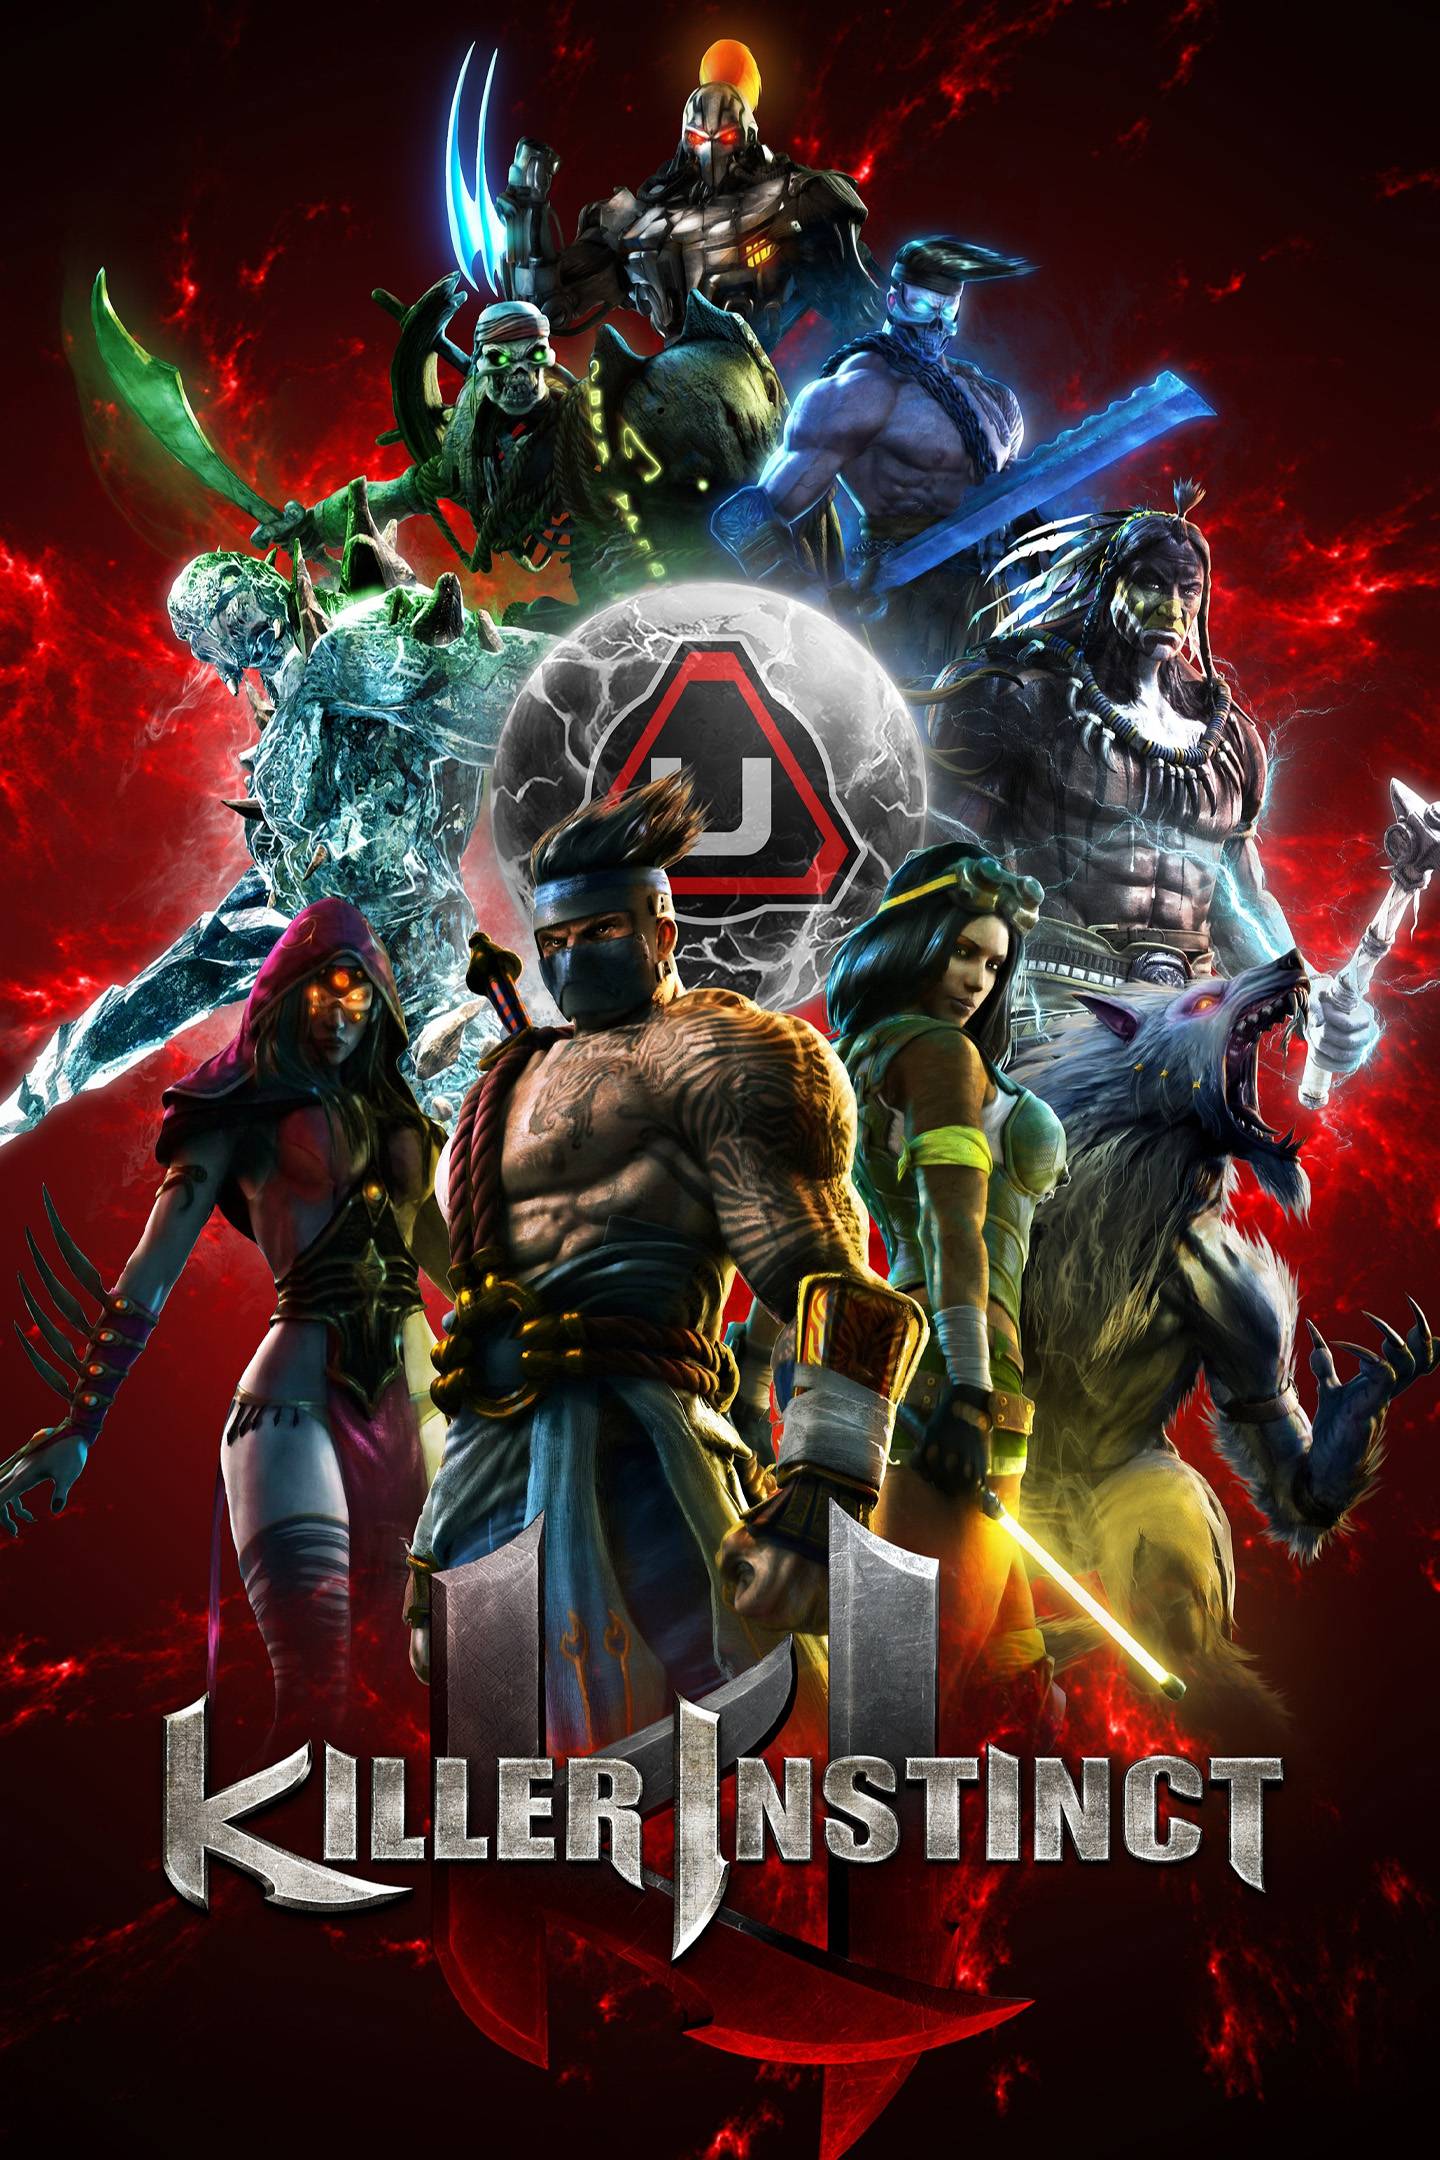 November 22 is Going to Be a Big Day for Killer Instinct Fans